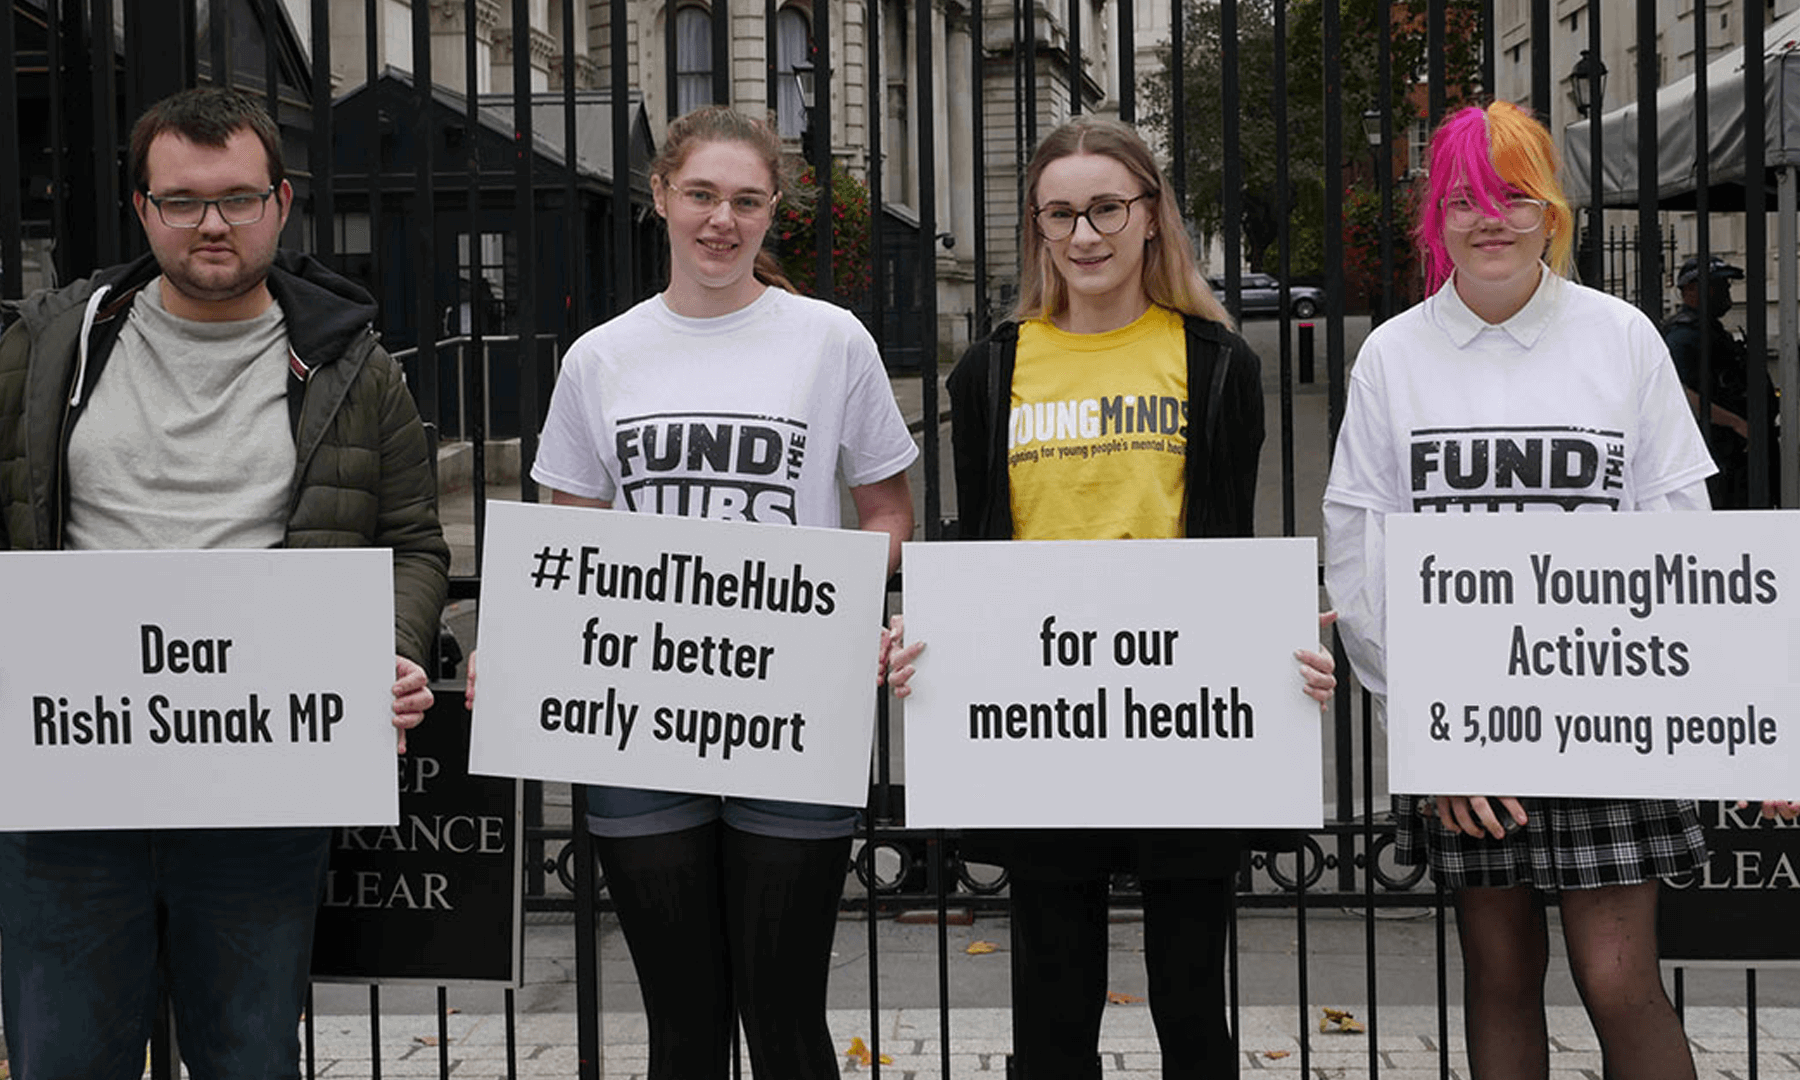 Four YoungMinds Activists at Downing Street holding placards calling for Rishi Sunak MP to Fund The Hubs